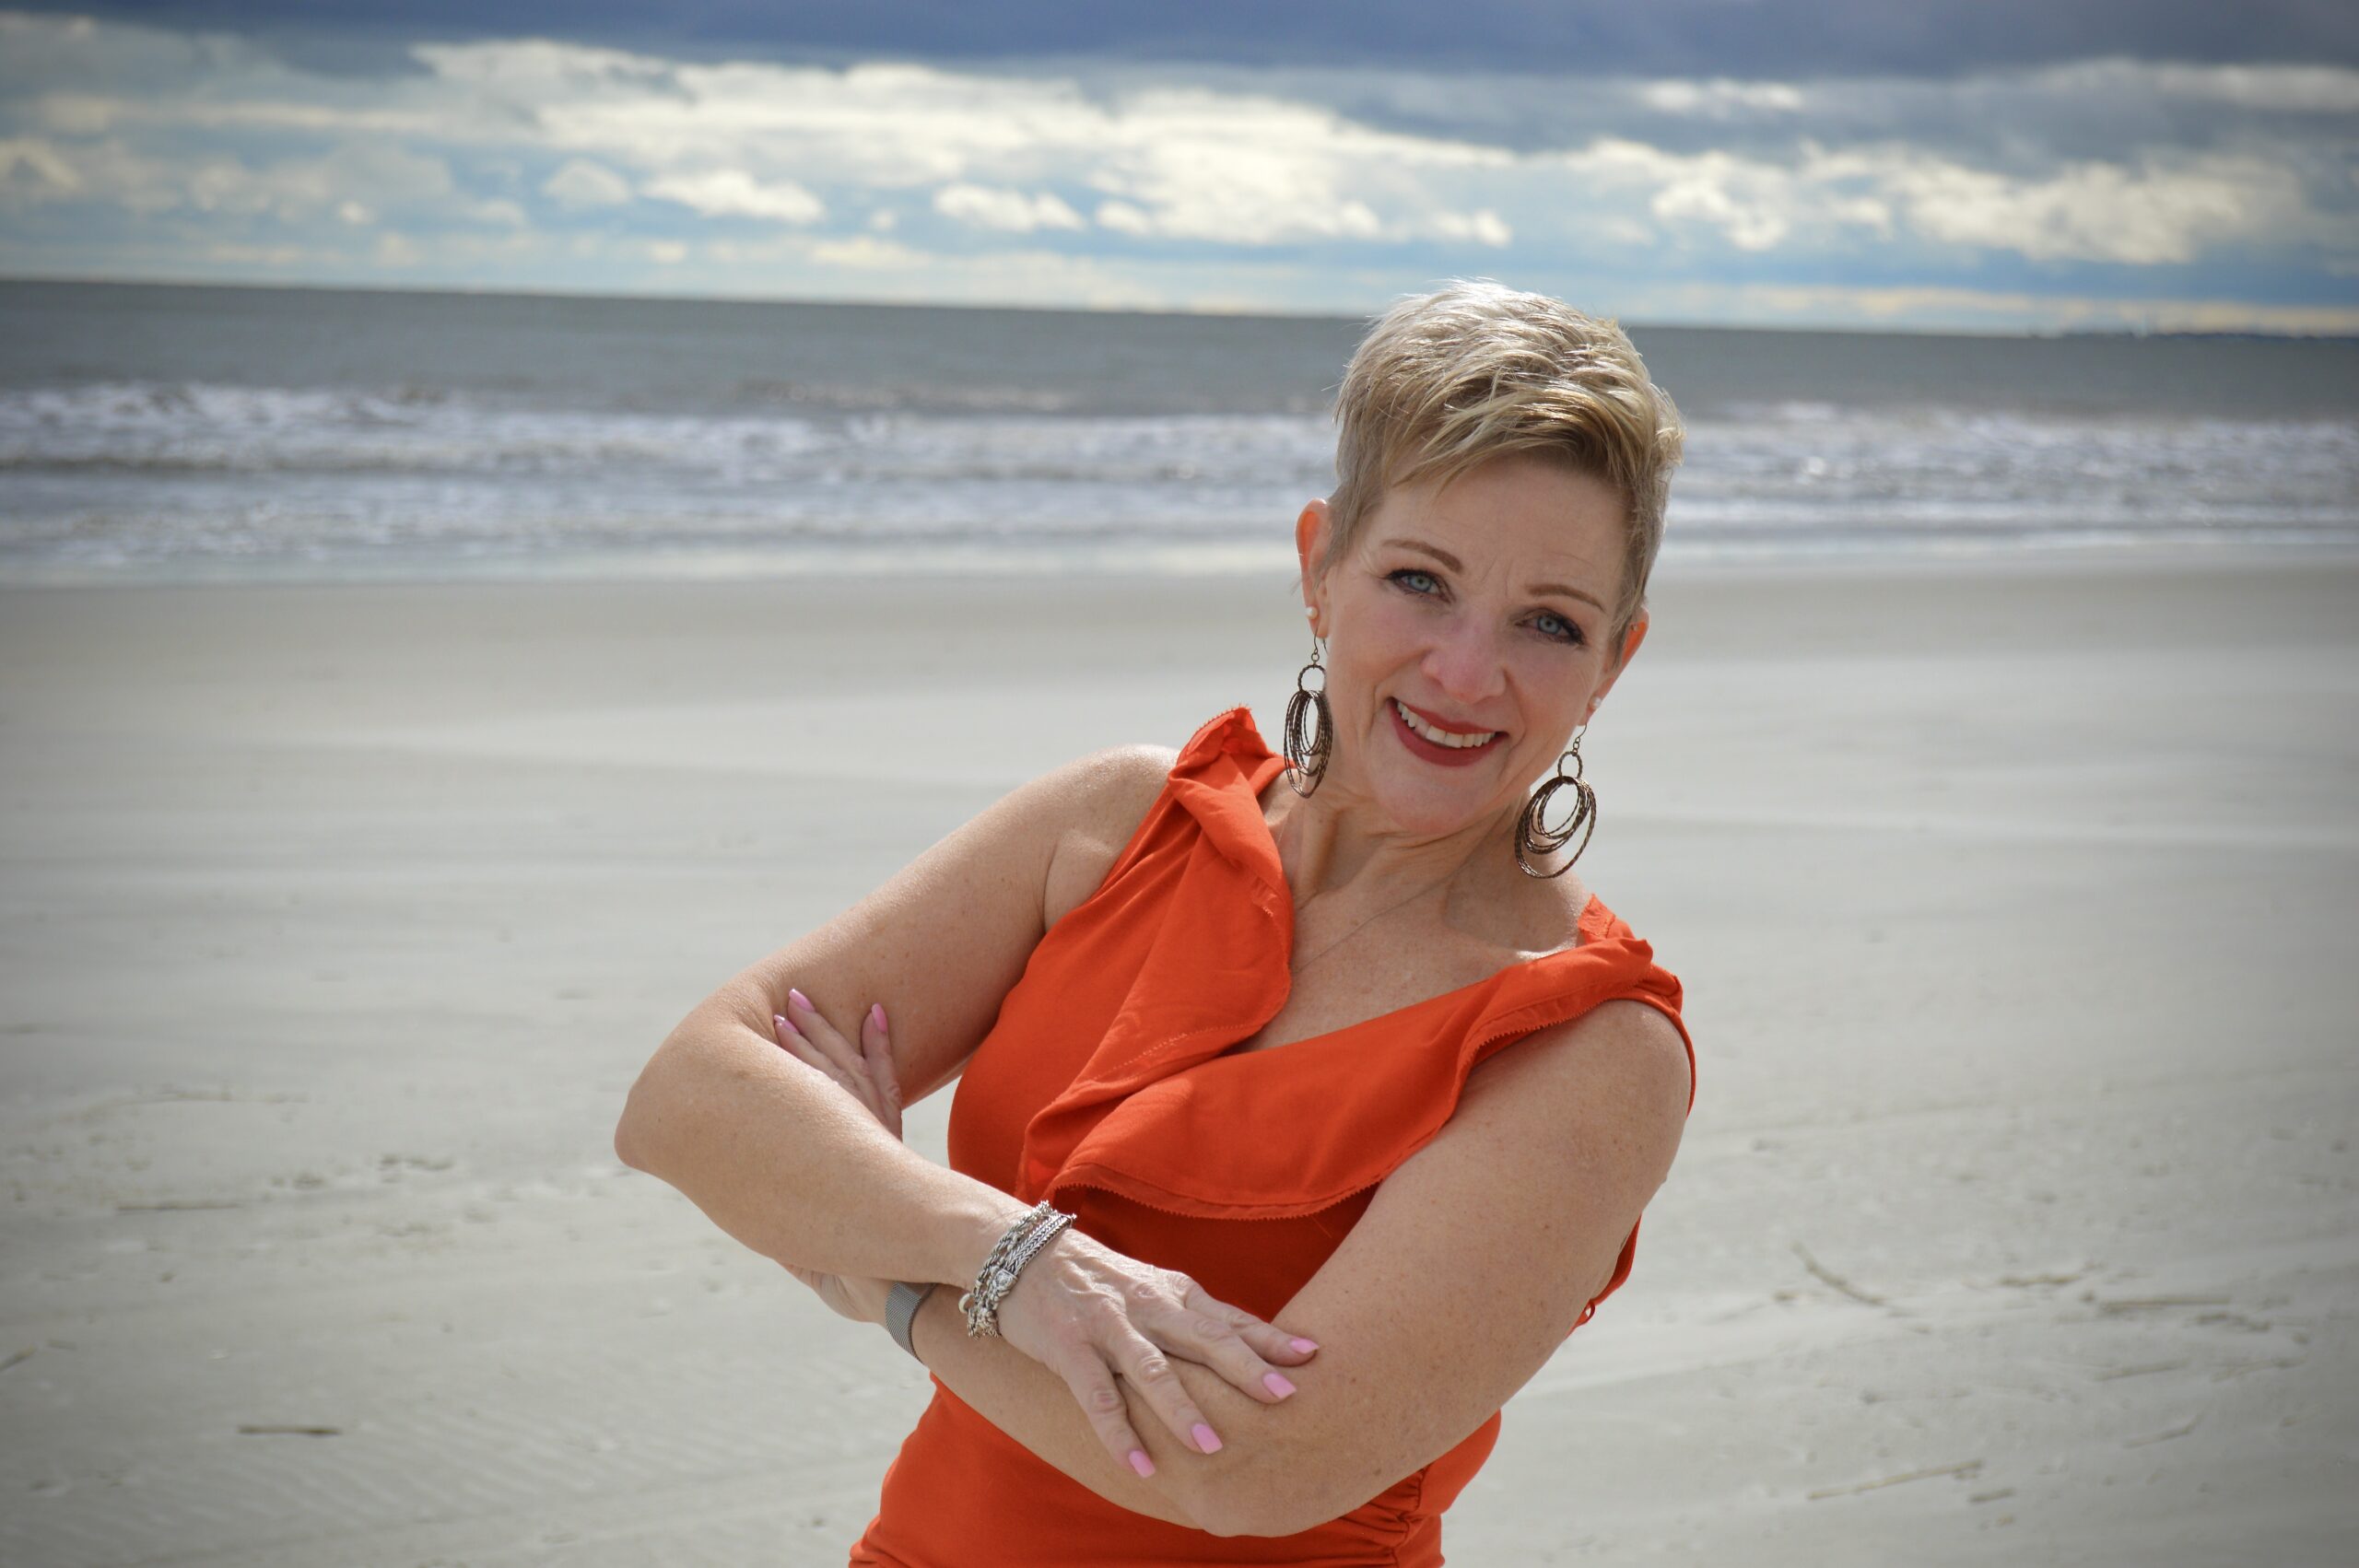 Dr. Kris standing on a sandy beach, posing with folded arms. They are wearing an orange sleeveless top and large hoop earrings. The sea and cloudy sky in the background create a serene setting, highlighting the impact of lifestyle choices.